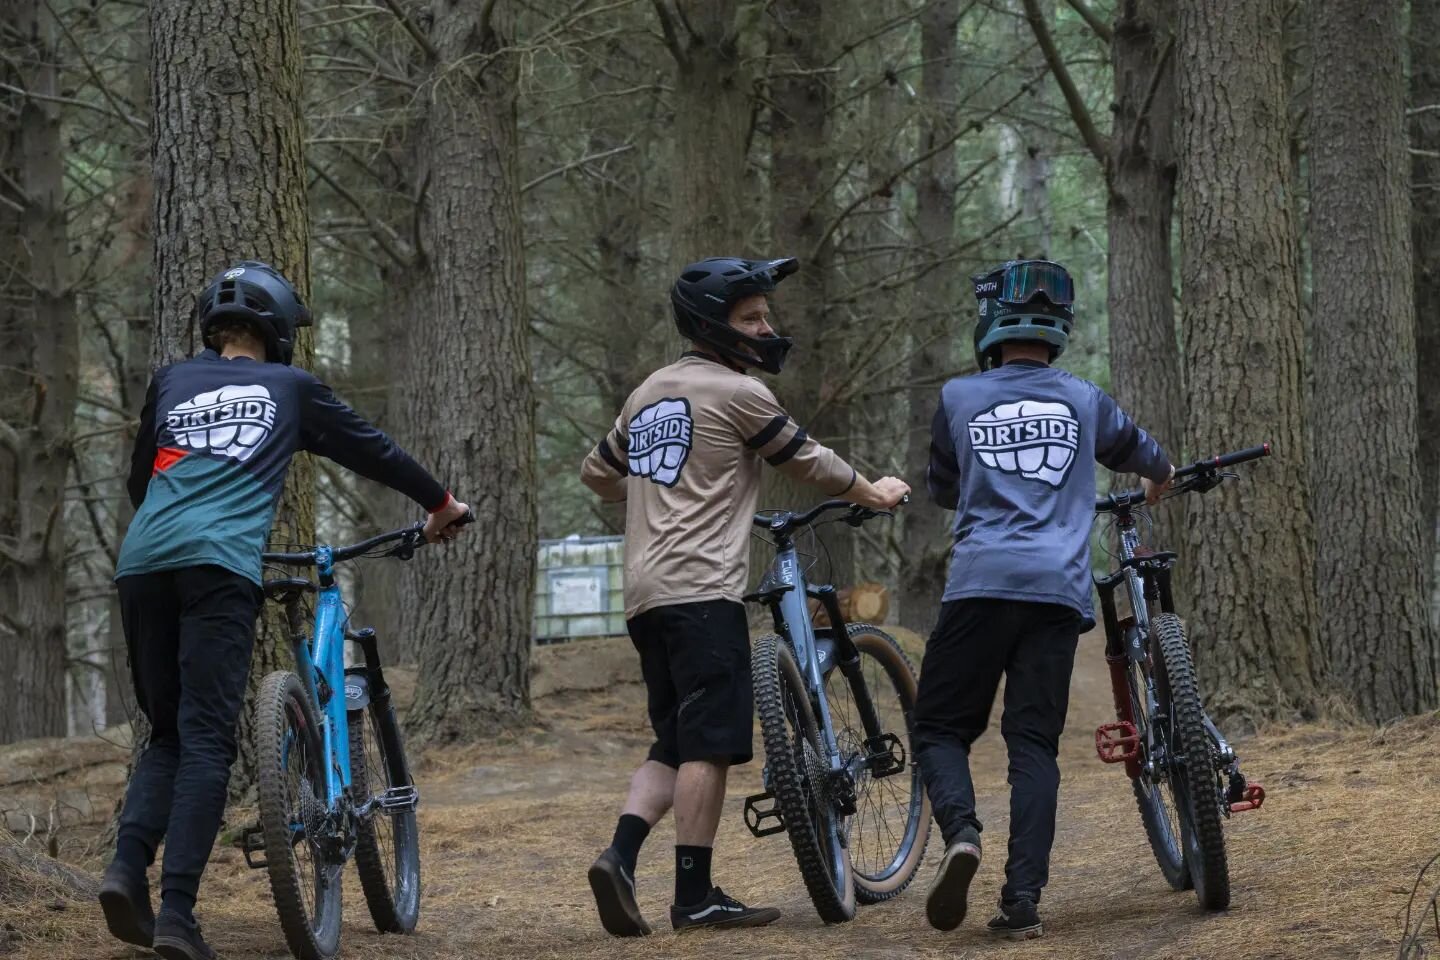 Check out our new team rider tops!

Follow us and tag 3 of your mates in the comments section below and you could win one!

📷 @twentysix_frames

#teamdirtside
#dirtside
#mtb
#mtblove
#mtblife
#lifebehindbars 
#win
#slick
#youknowyouwantone
#tagandwi